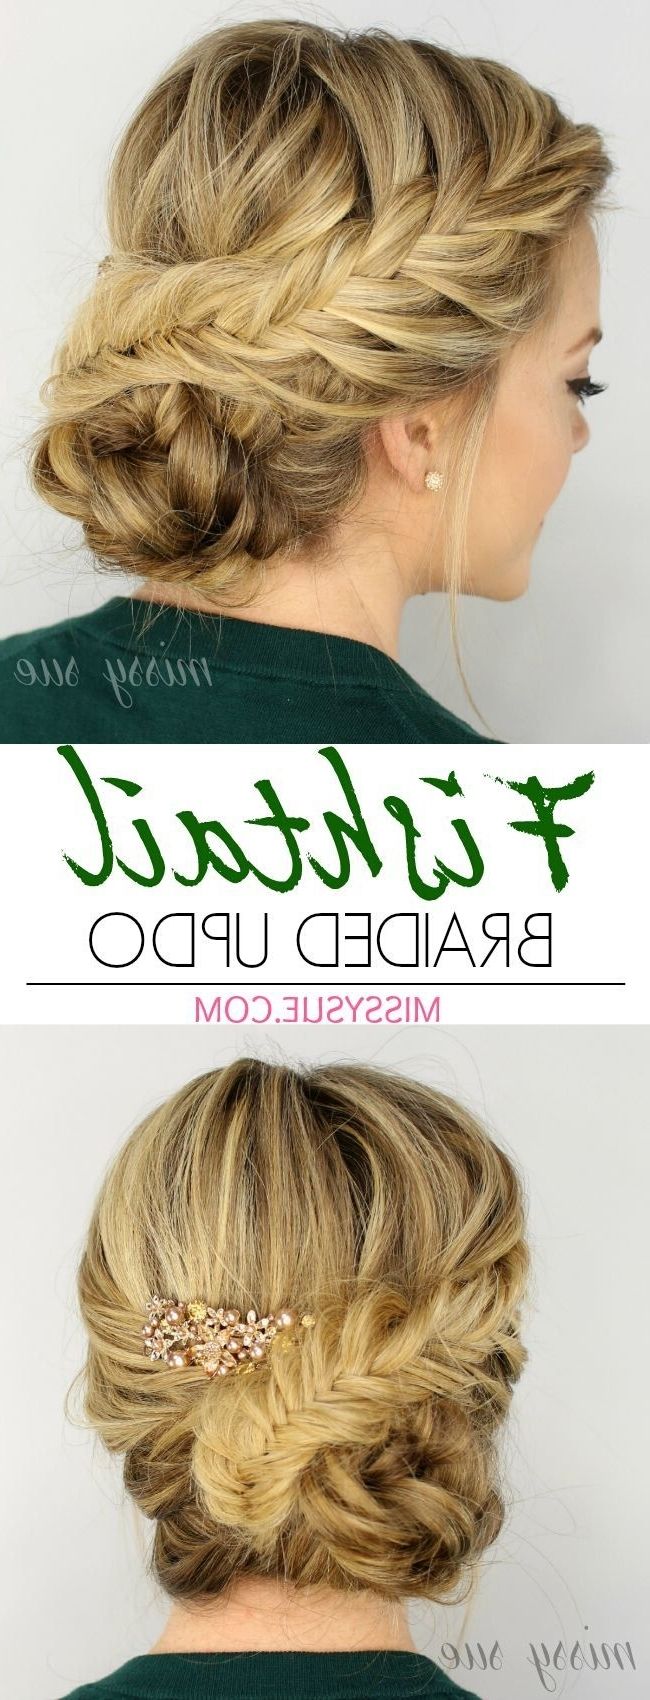 20 Exciting New Intricate Braid Updo Hairstyles – Popular Haircuts Throughout Pretty Updo Hairstyles (View 12 of 15)